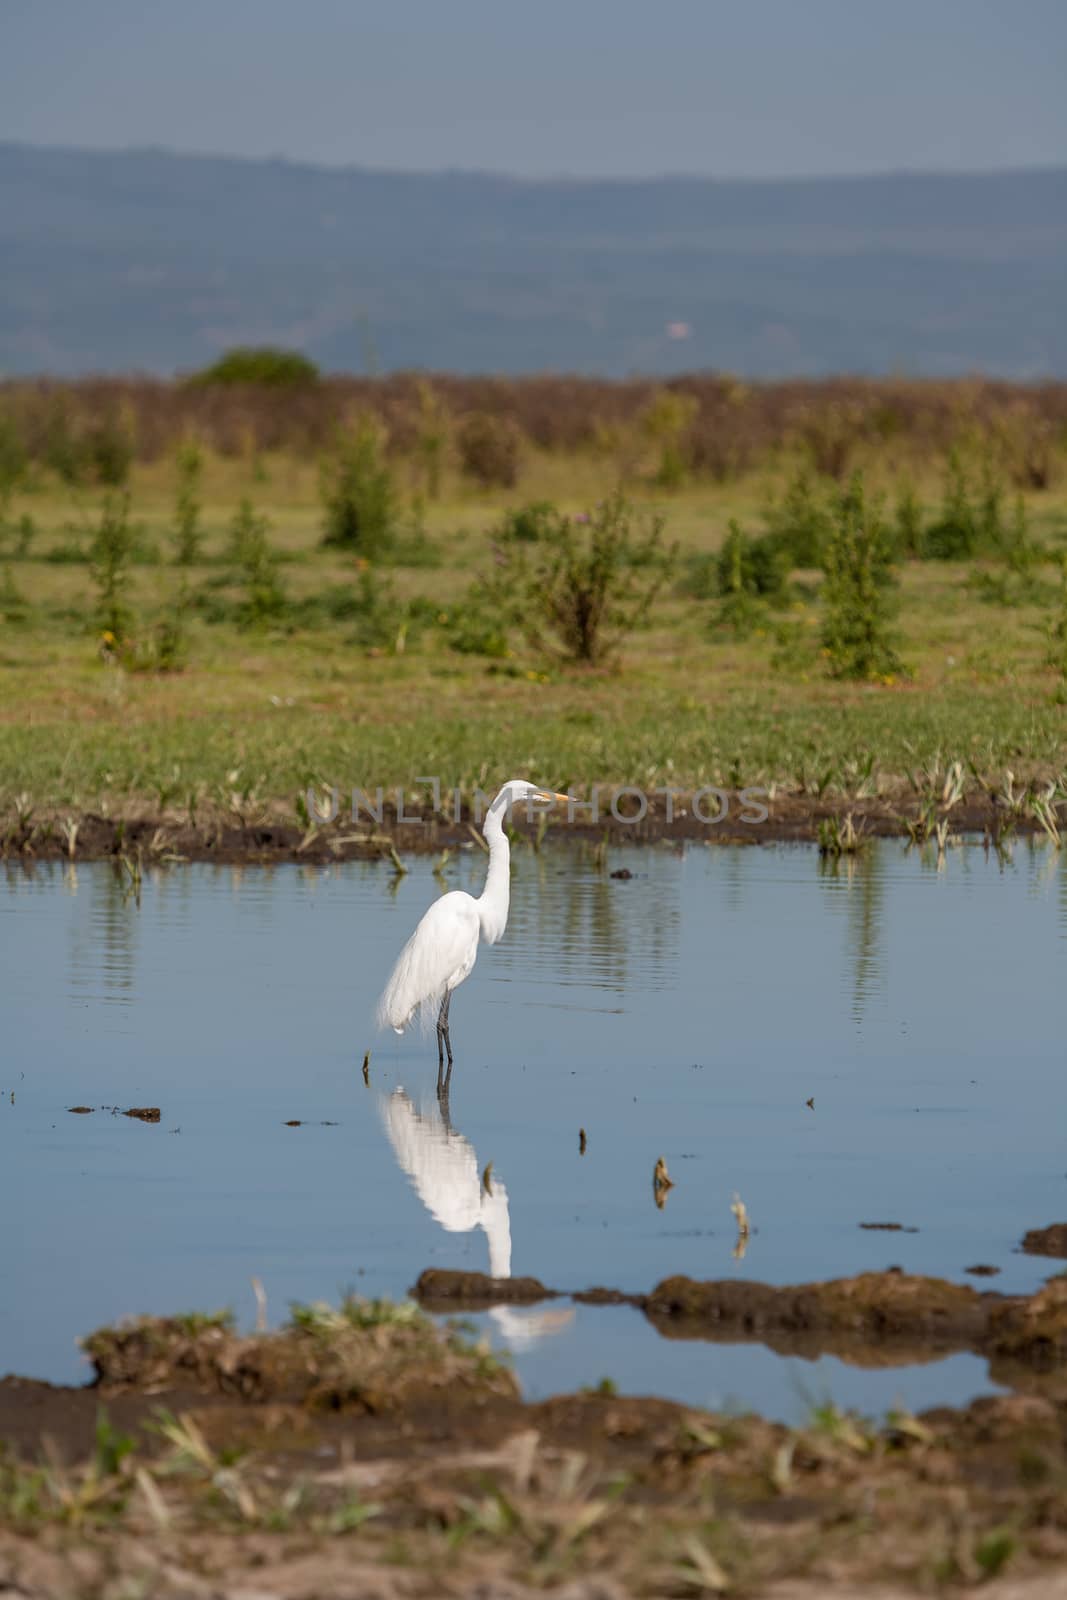 The one white heron against the blue pond